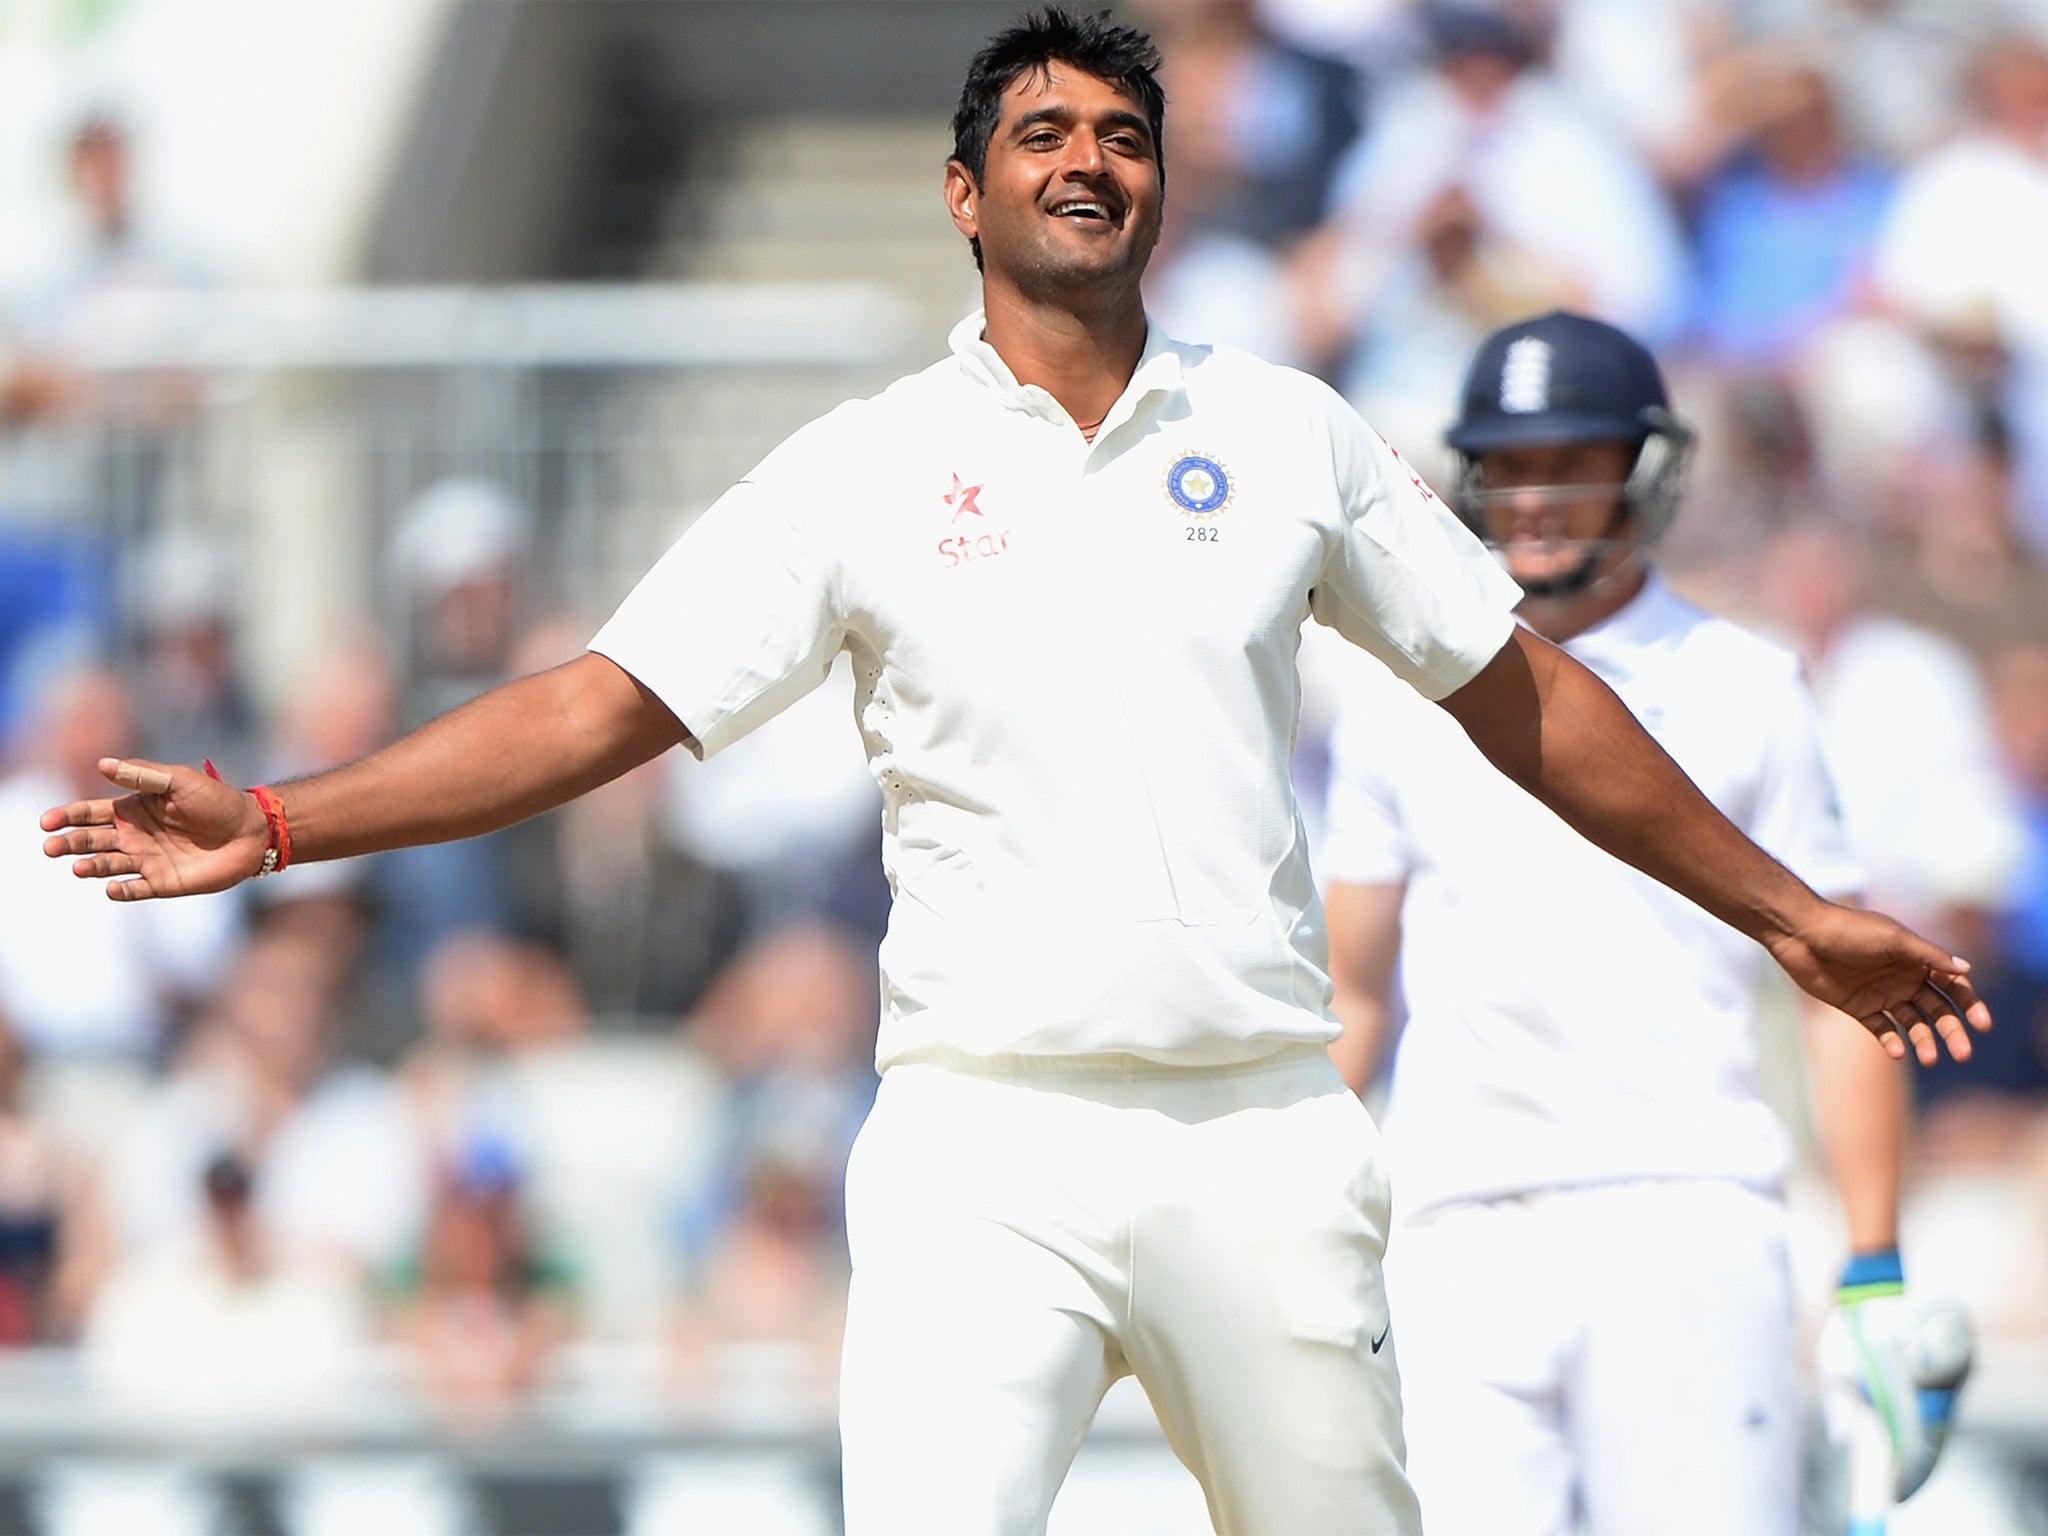 Pankaj Singh, who has begun to enjoy a cult following among cricket devotees, celebrates taking his first Test wicket at Old Trafford last week